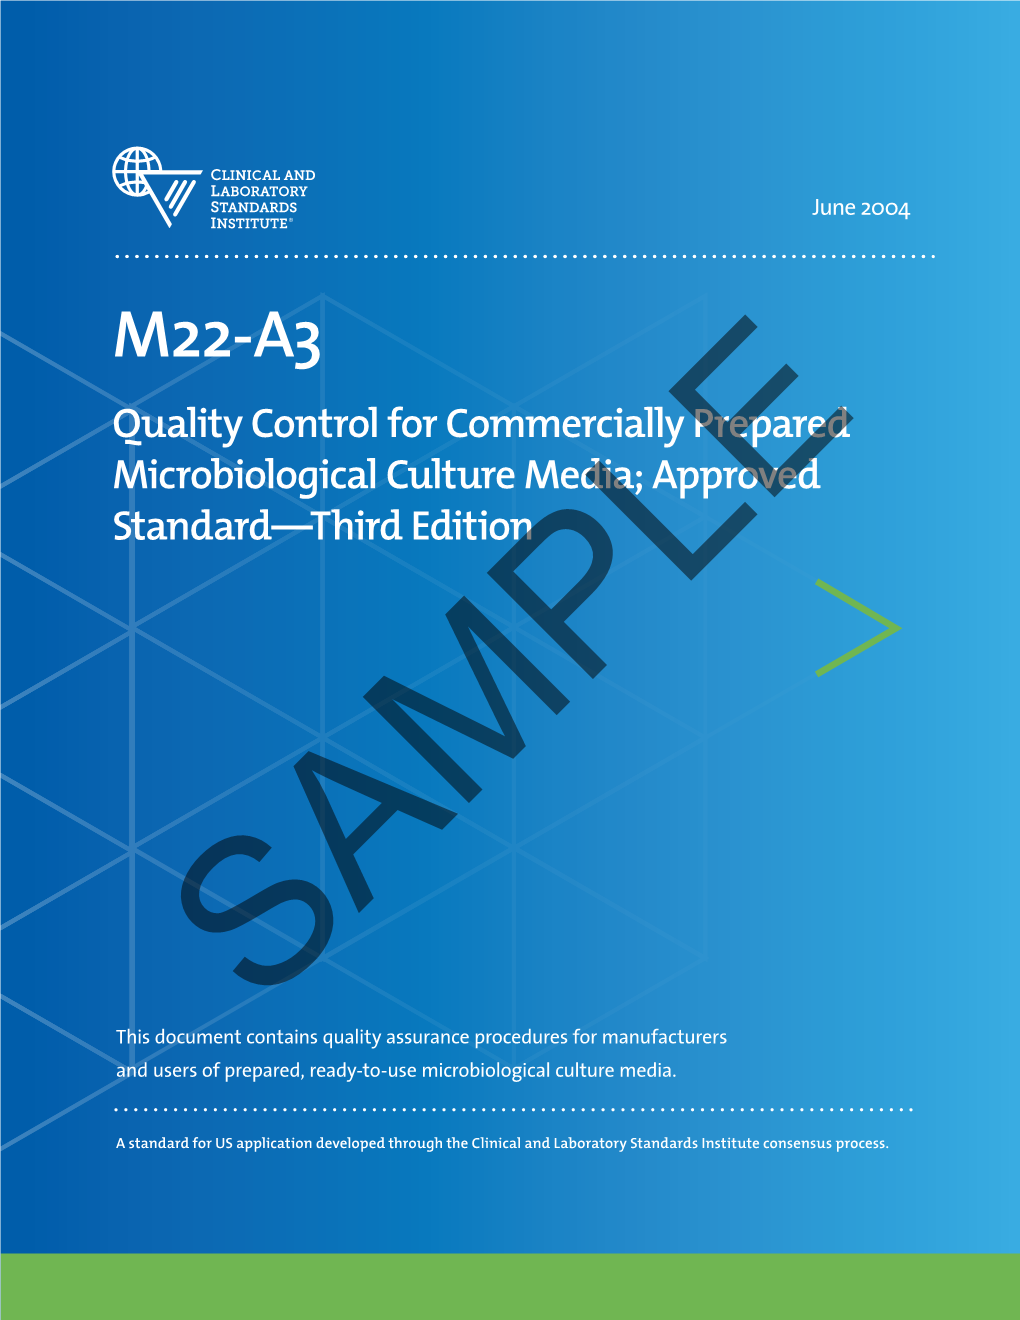 M22: Quality Control for Commercially Prepared Microbiological Culture